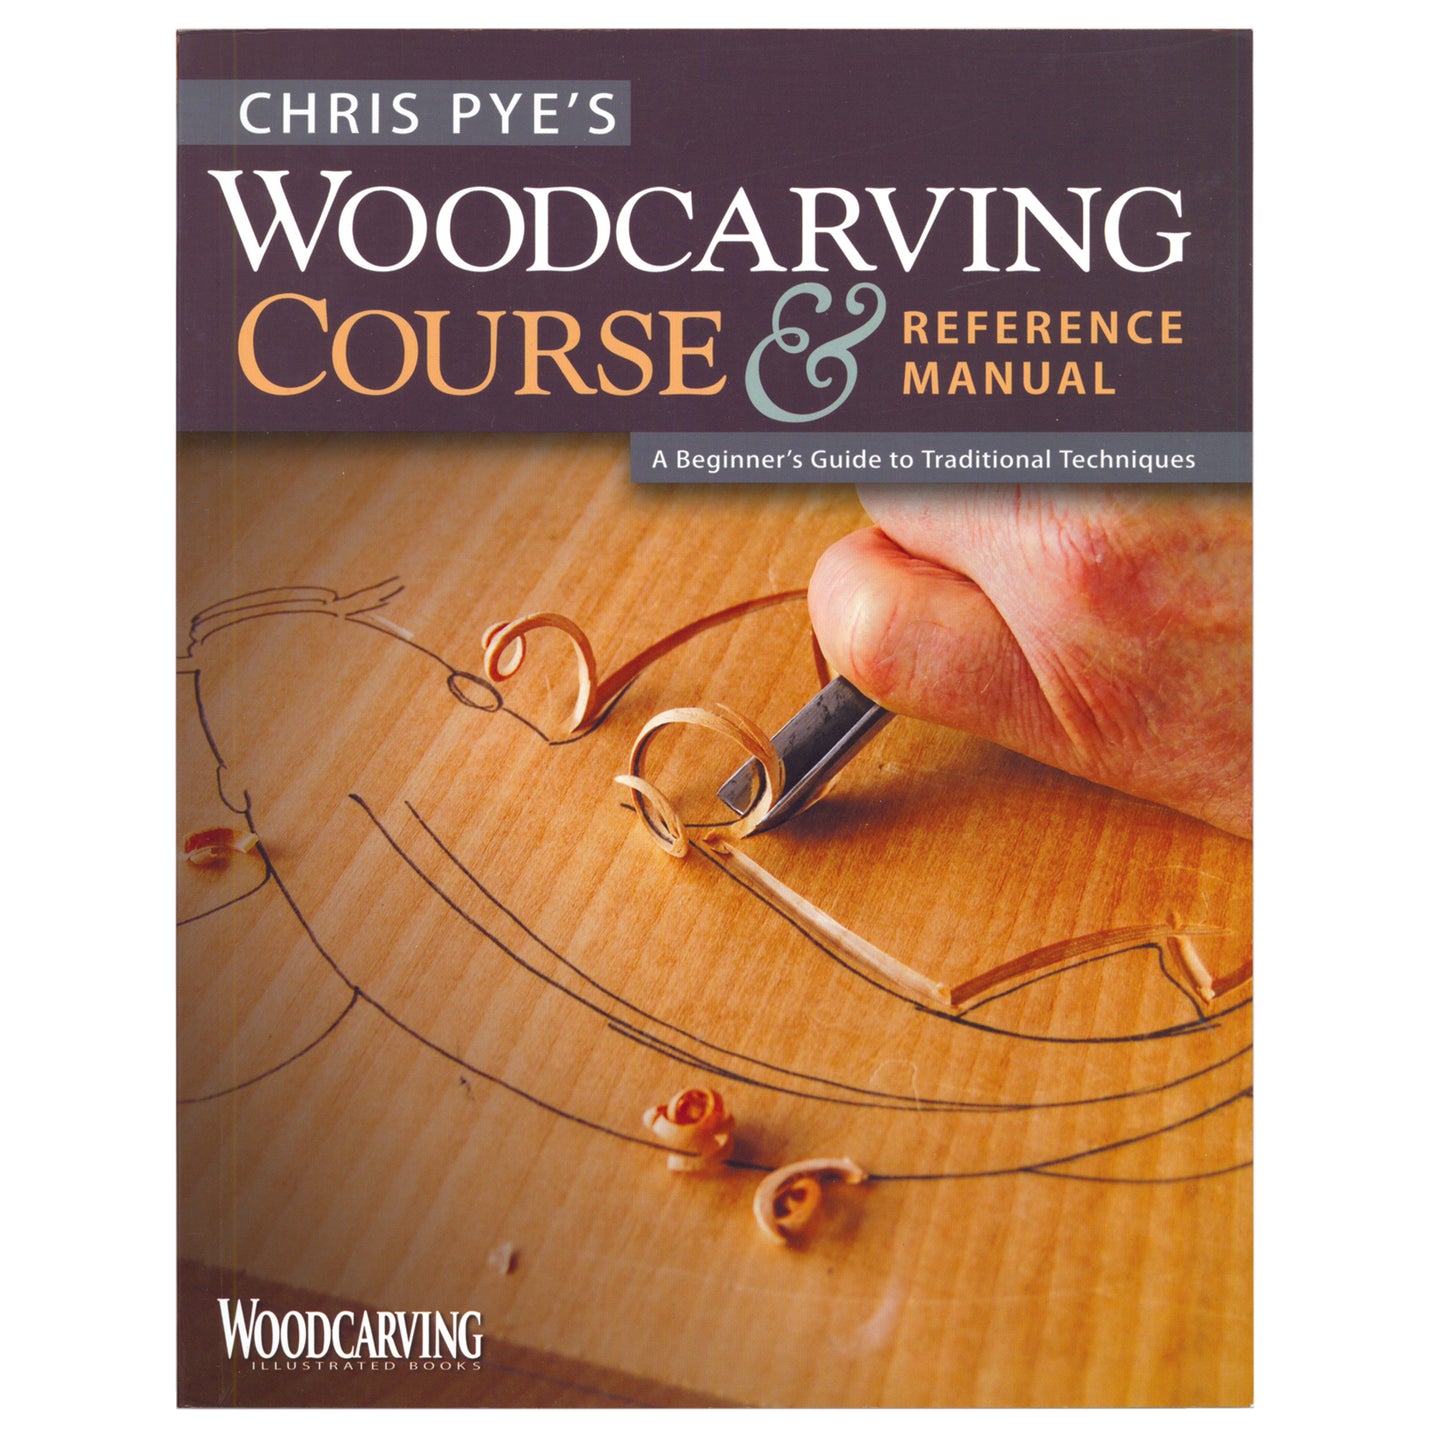 Chris Pye's Woodcarving Course & Reference Manual alt 0